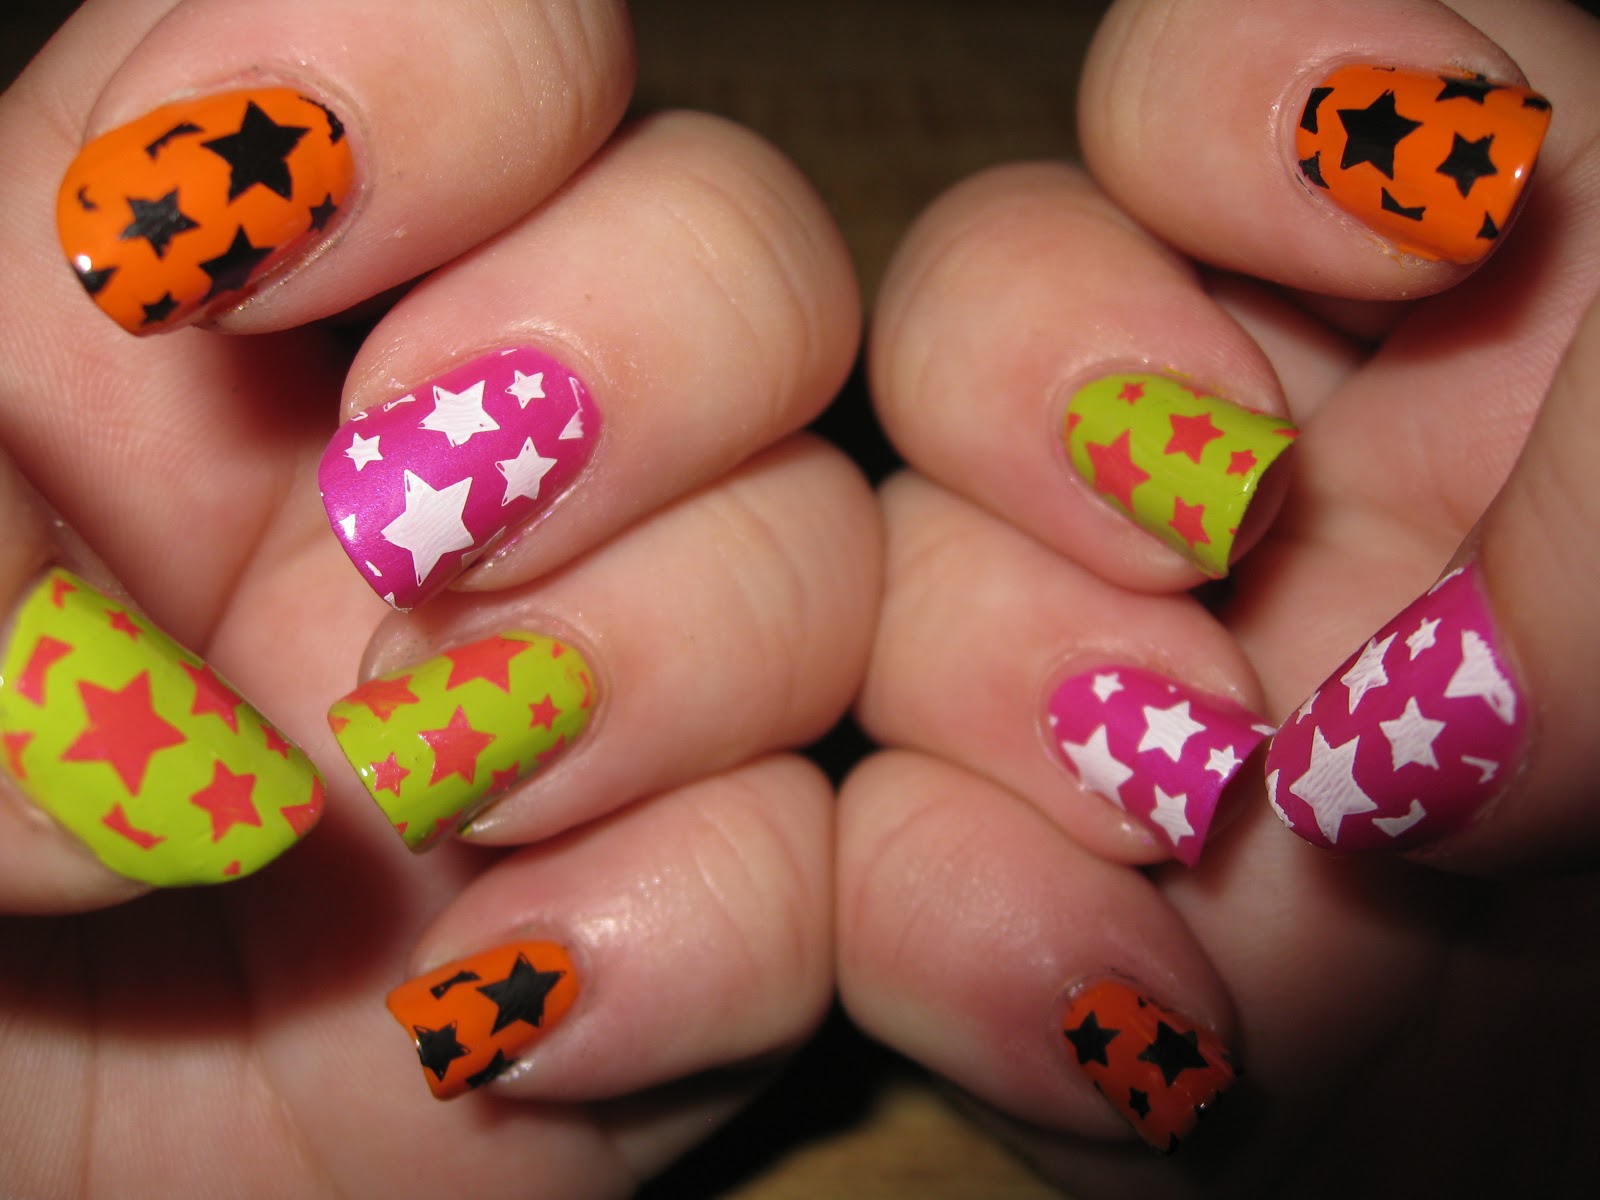 1. "Creepy Clown Nails: 10 Spooky Designs for Halloween" - wide 2